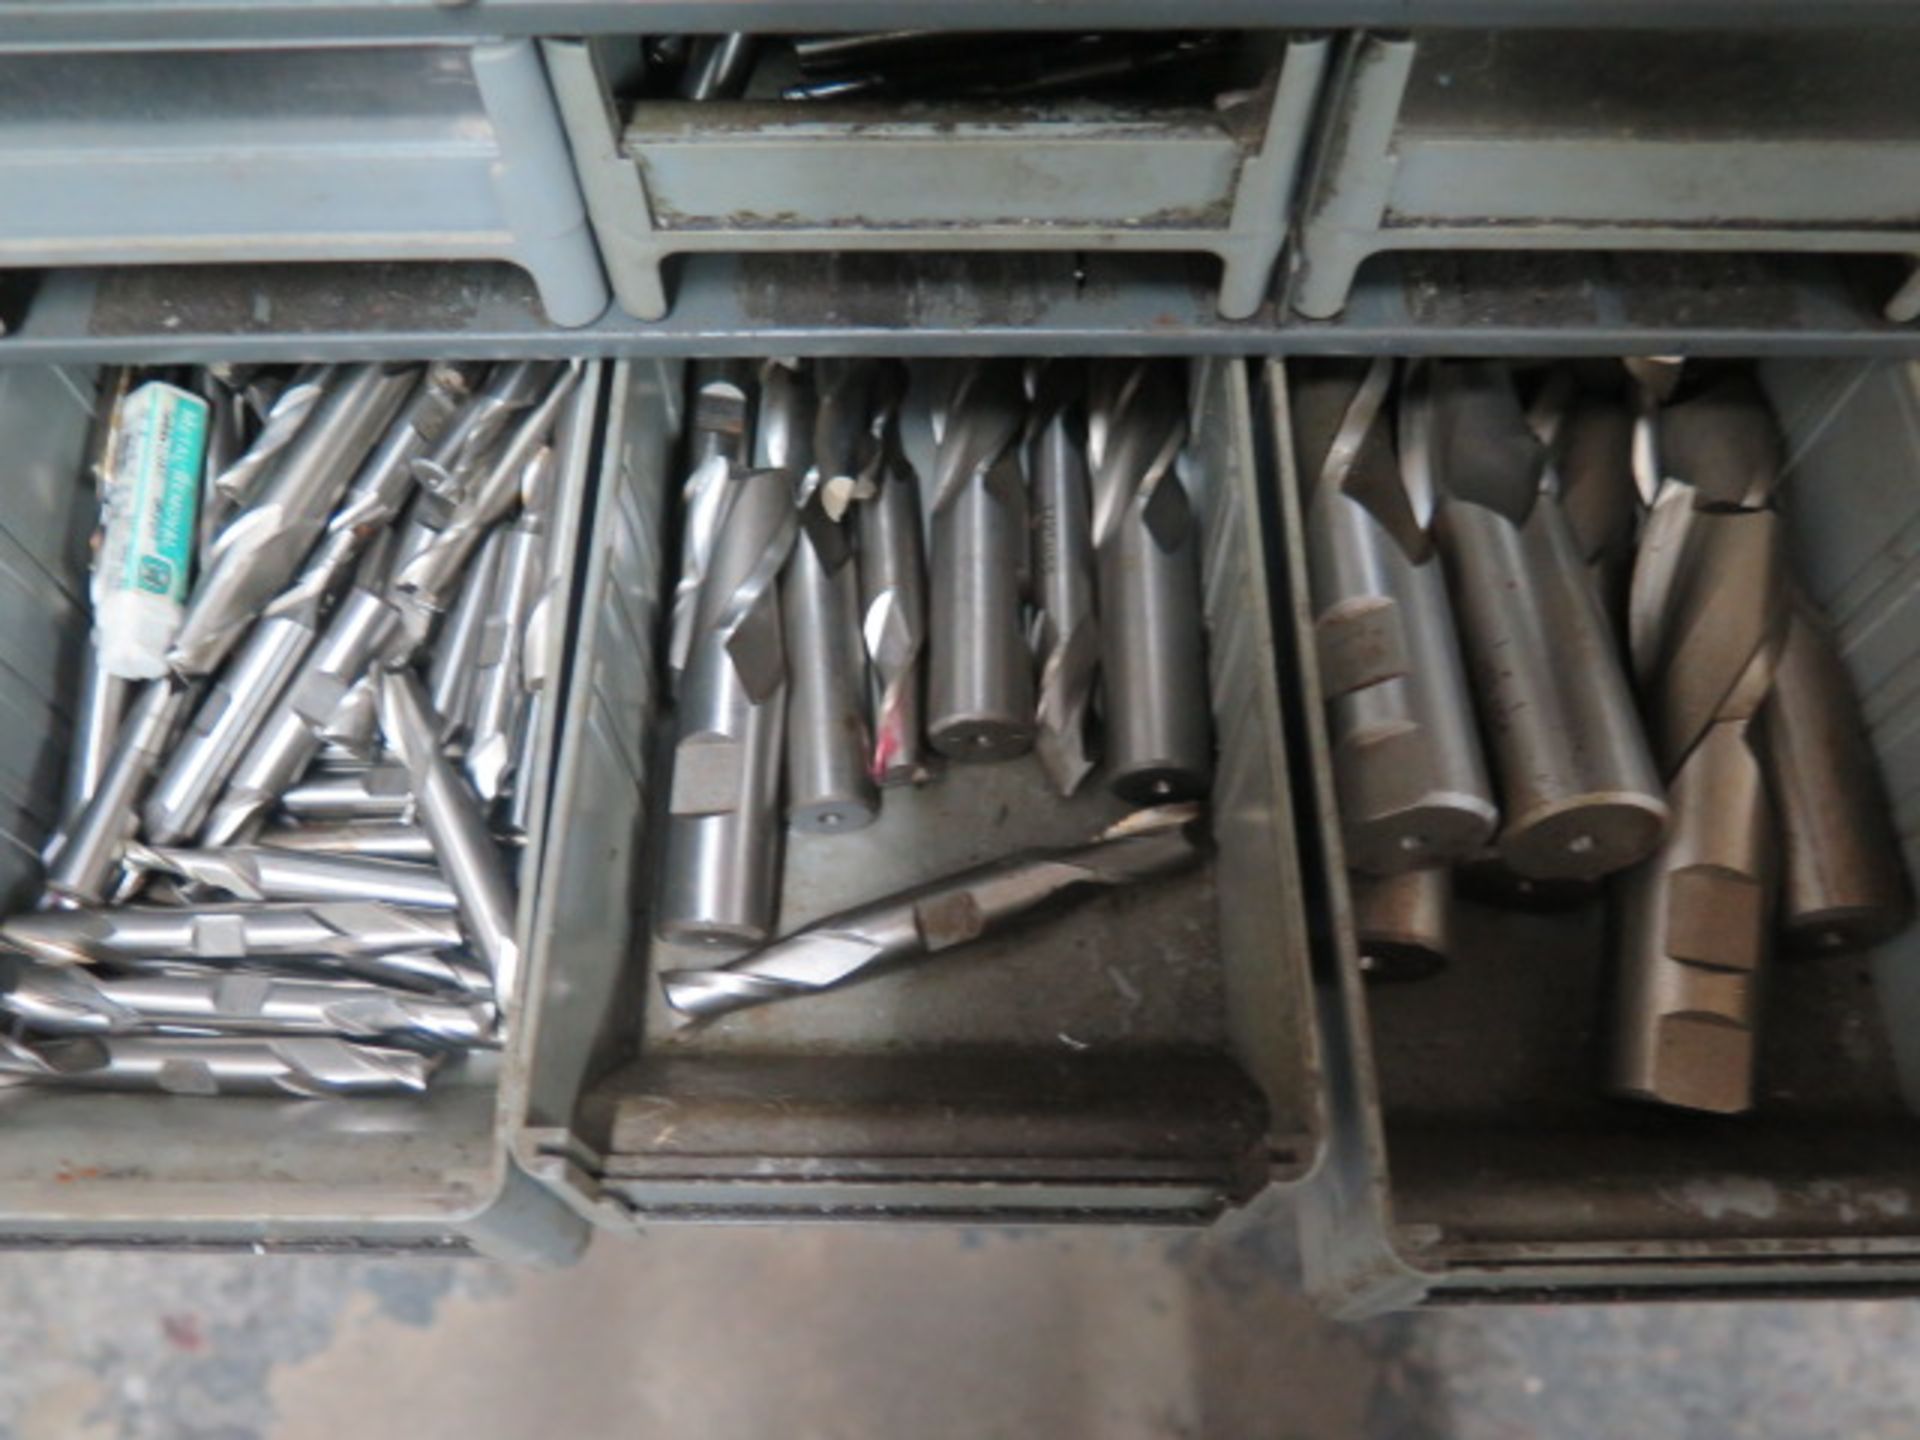 Carbide and High Speed Endmills, Carbide Inserts, Mill Slot Cutters and Hardware w/ Cabinets (SOLD - Image 6 of 8